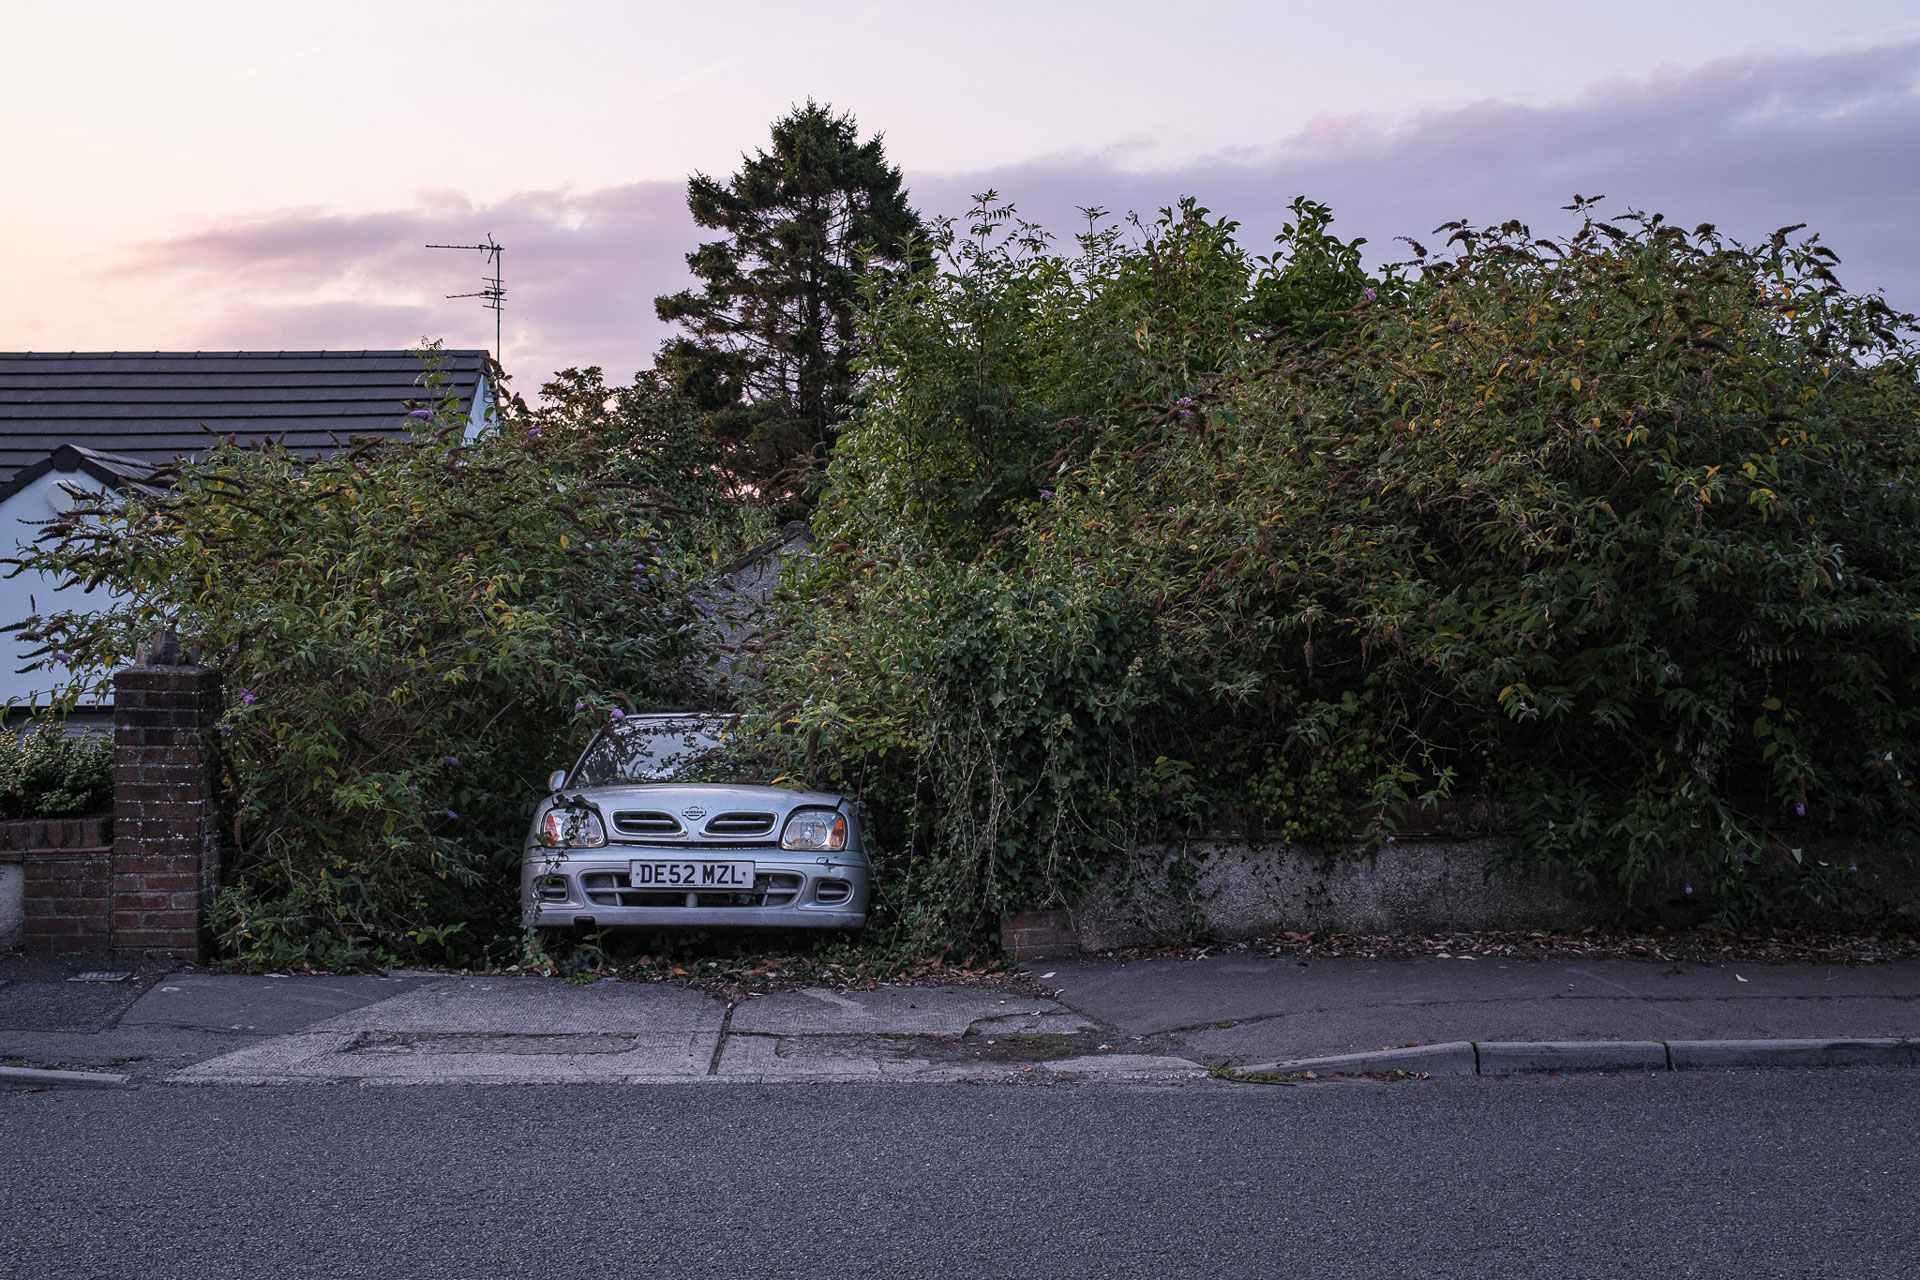 Along The Way Photographic Documentary a forgotten about Nissan Micra in Portishead